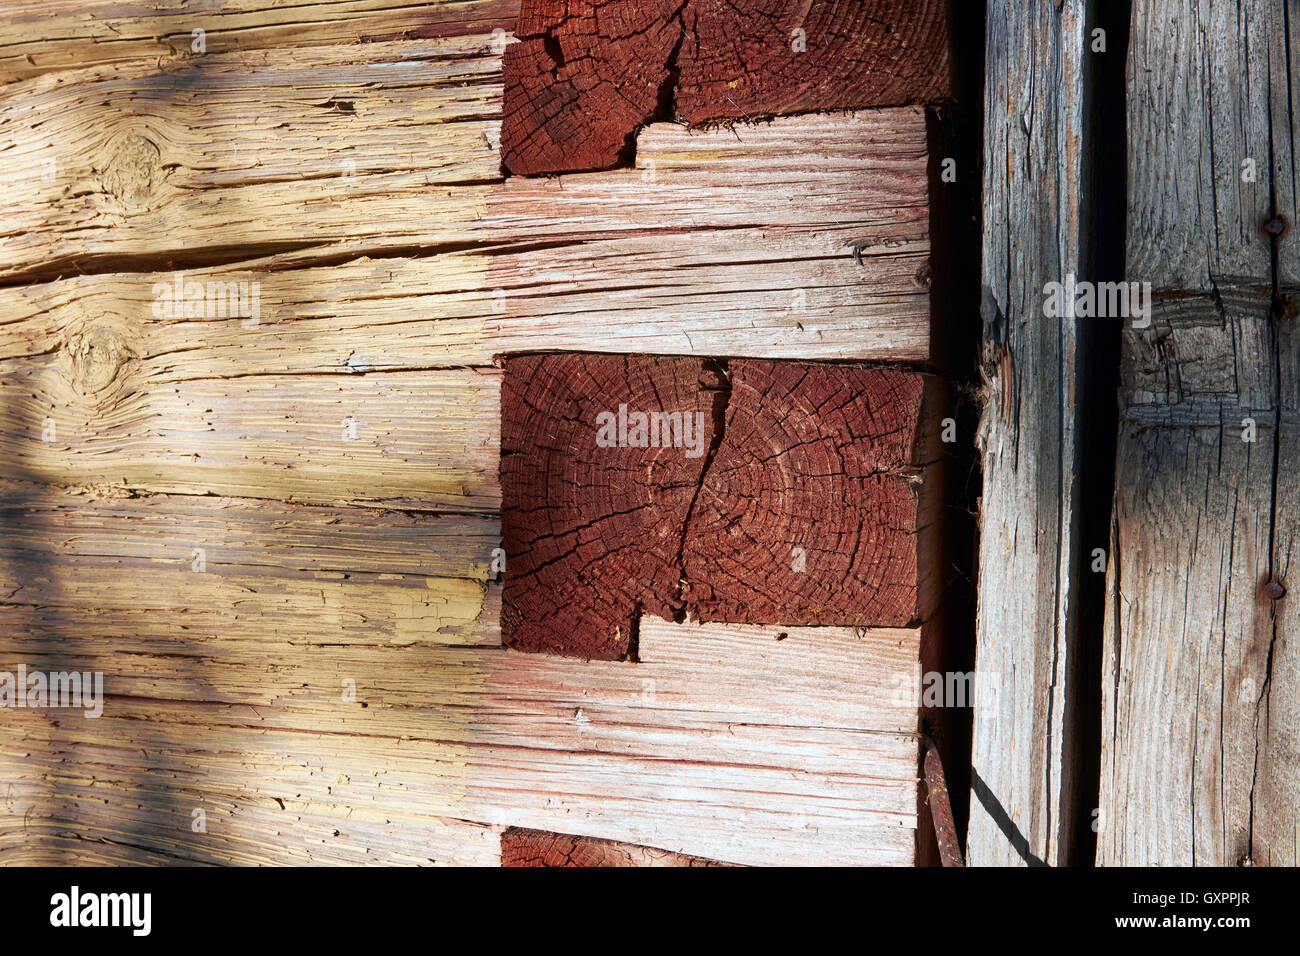 tooth-edge joint in an old log house corner, Finland Stock Photo